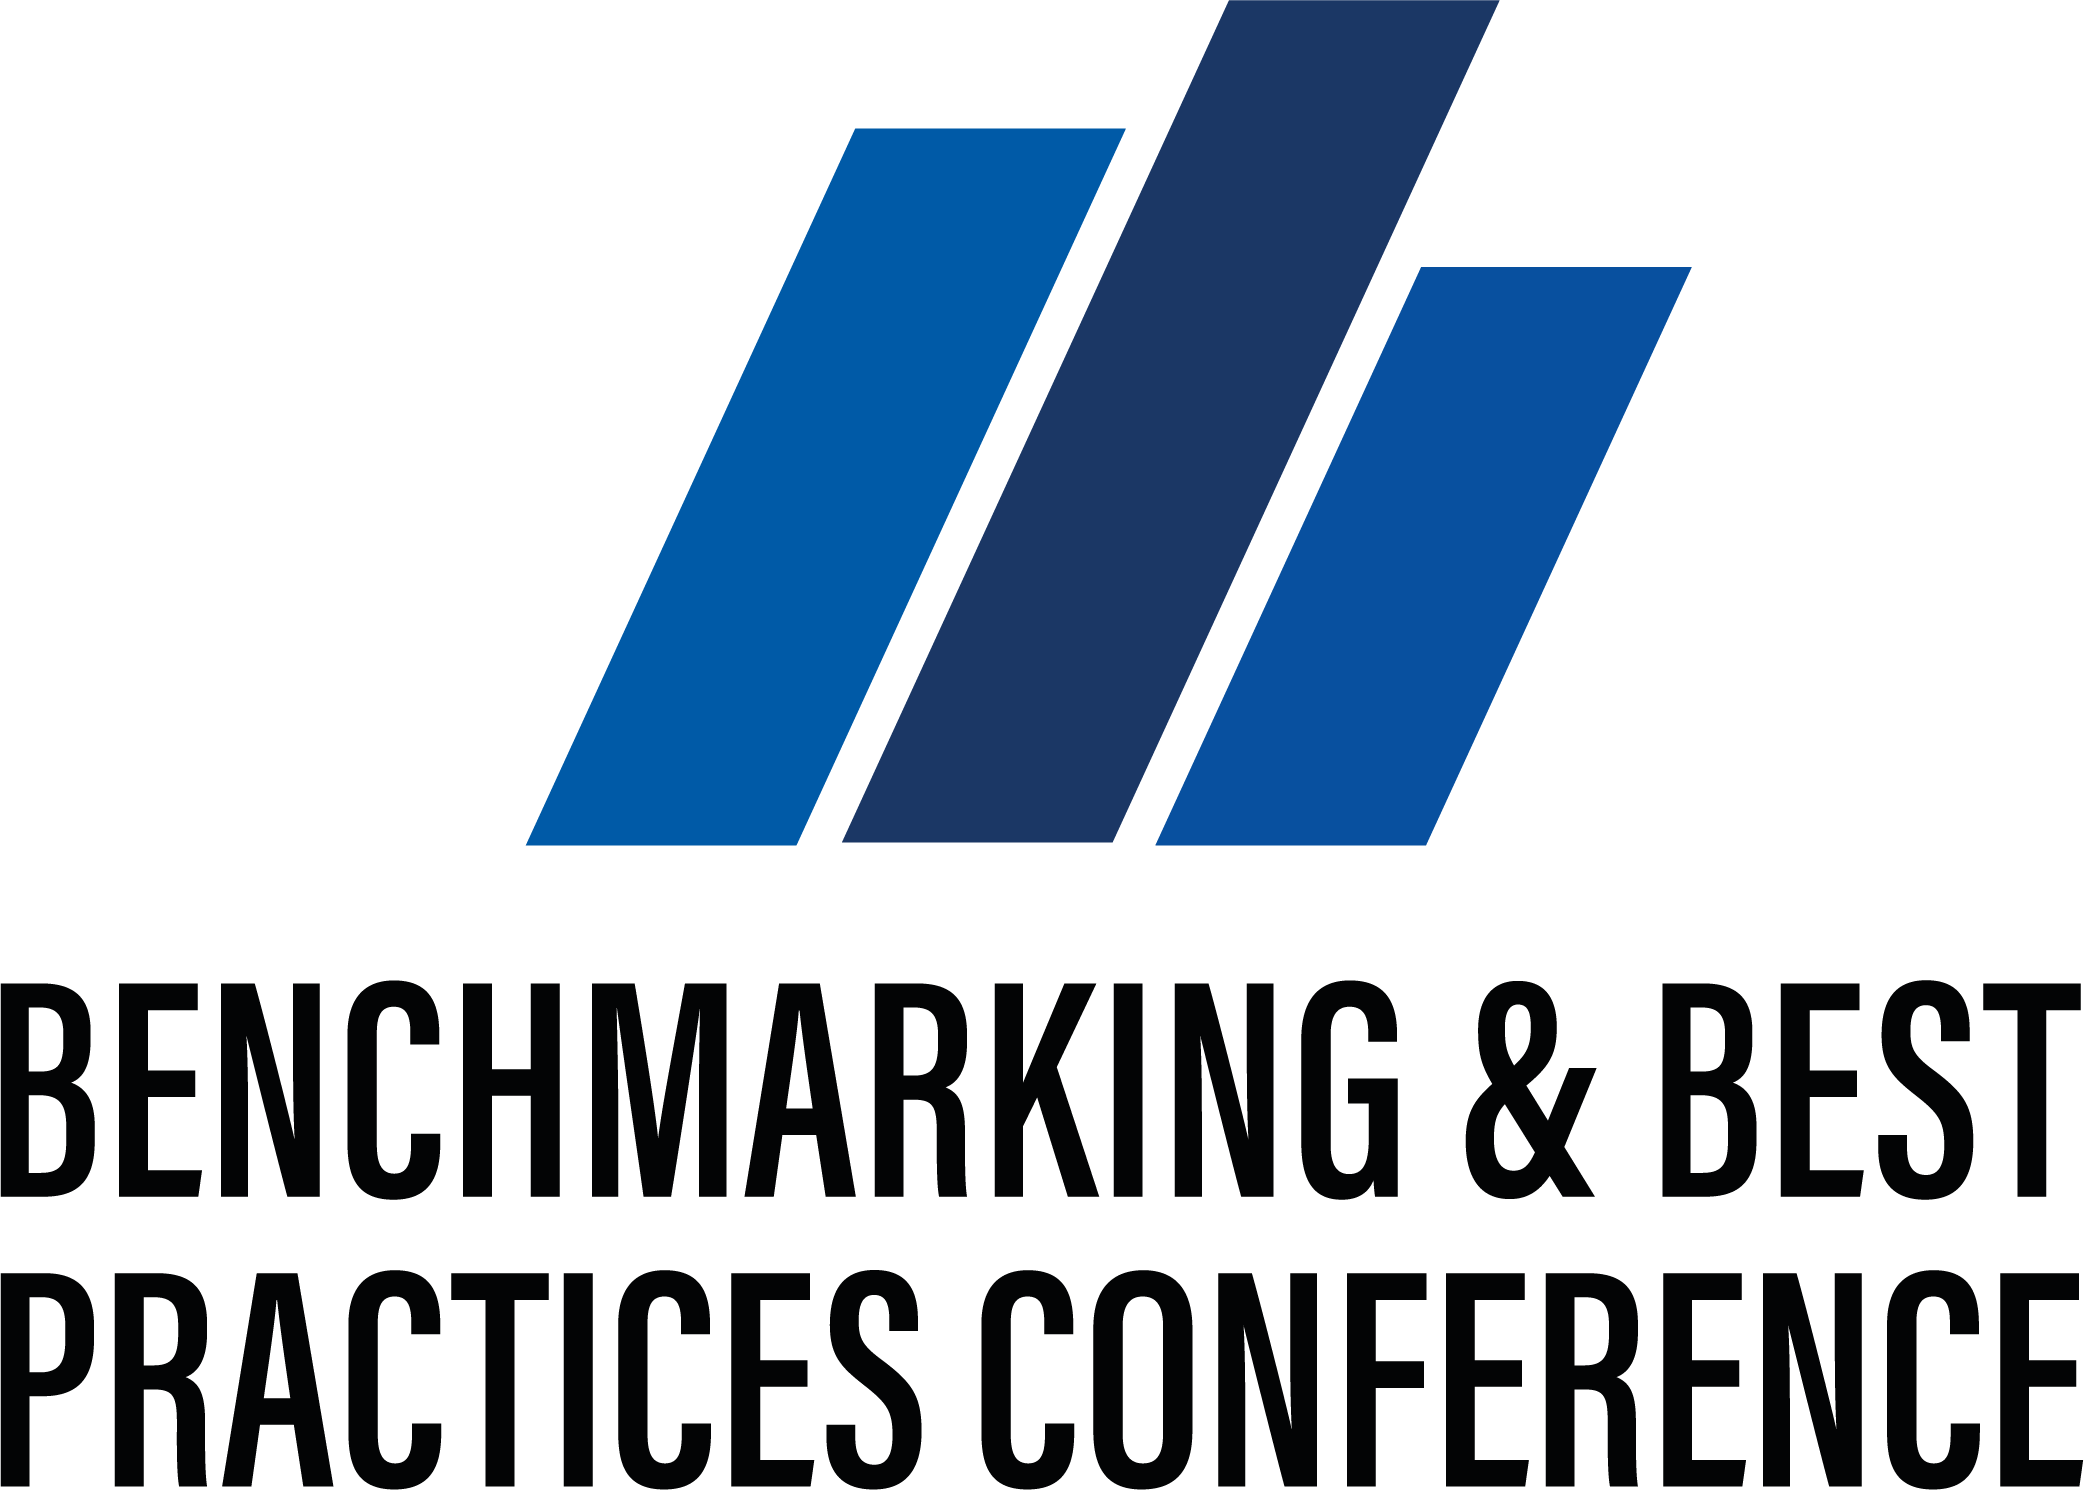 Benchmarking and Best Practices Conference logo